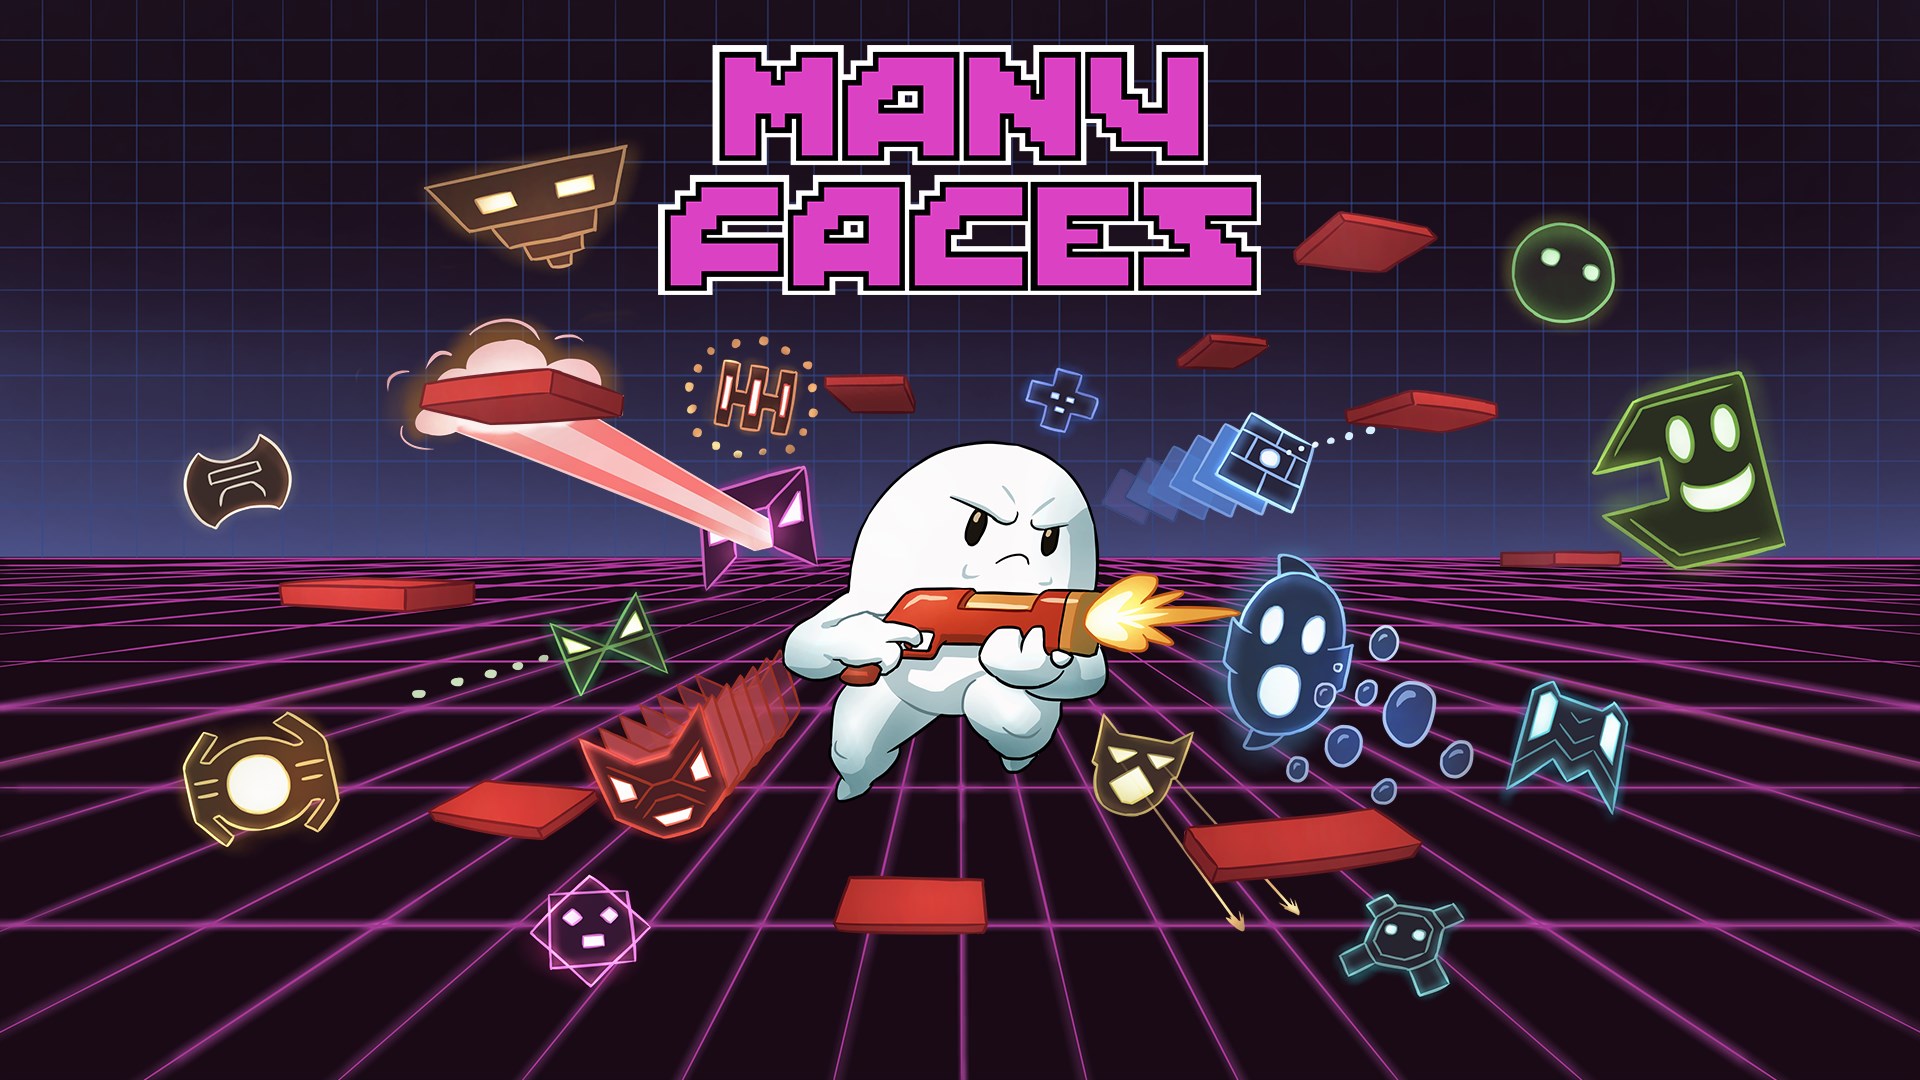 Video For Many Faces Is Now Available For Xbox One